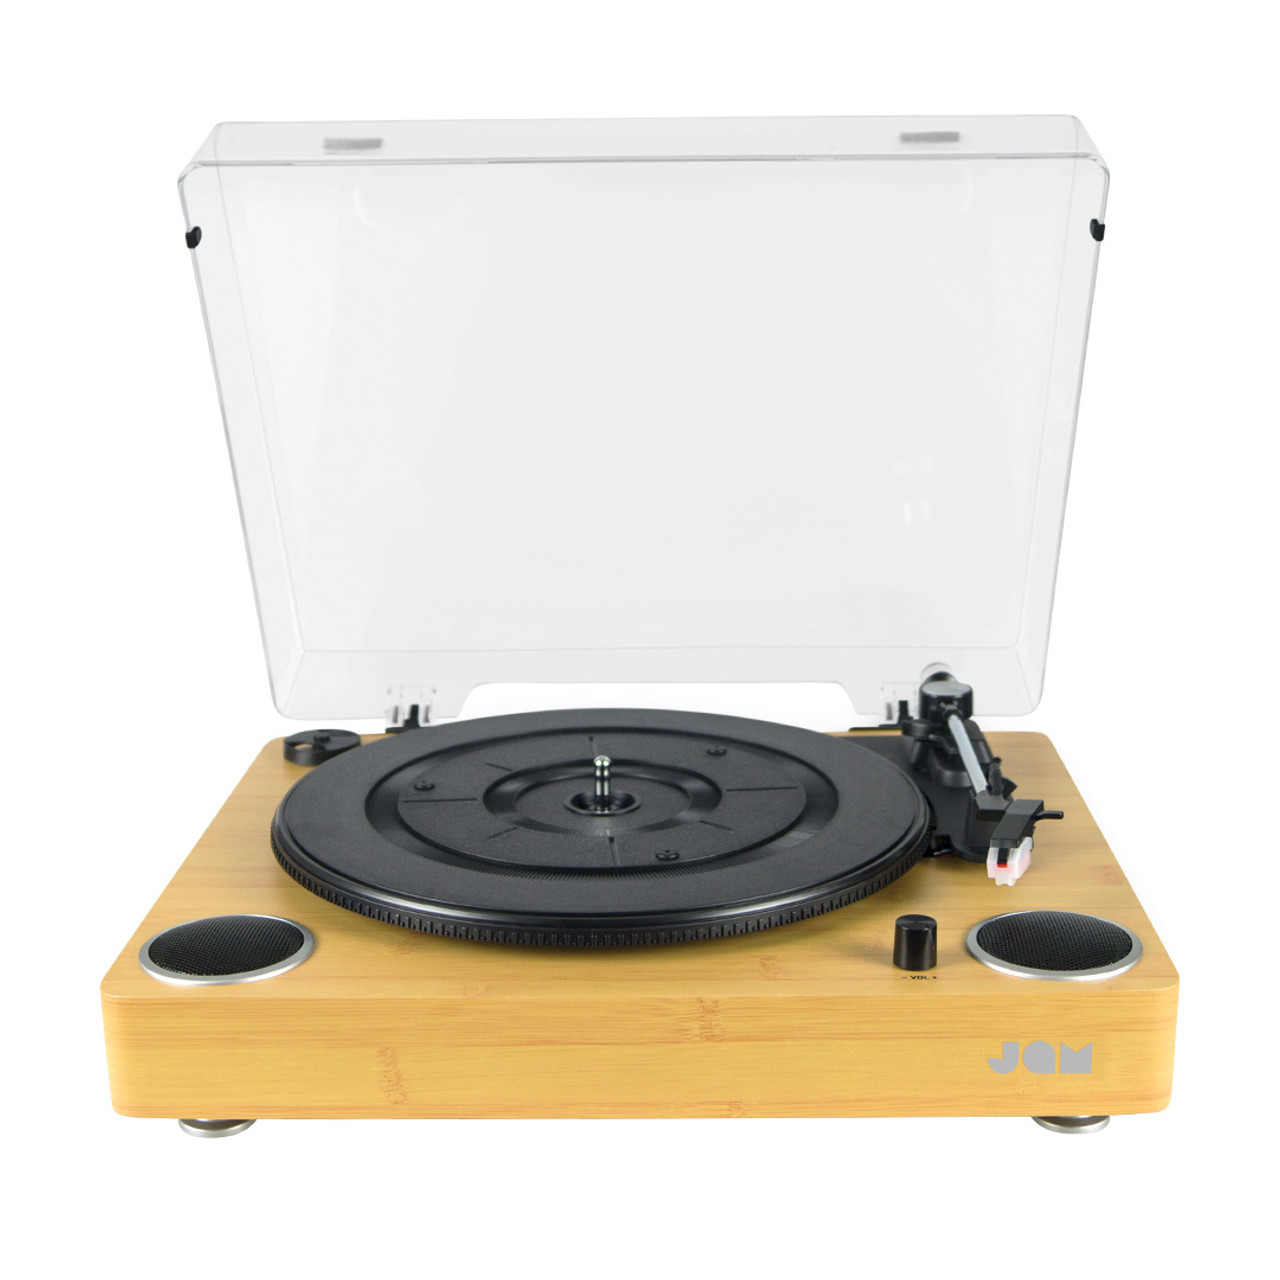 Jam Audio Sound Turntable With Built-In Speakers